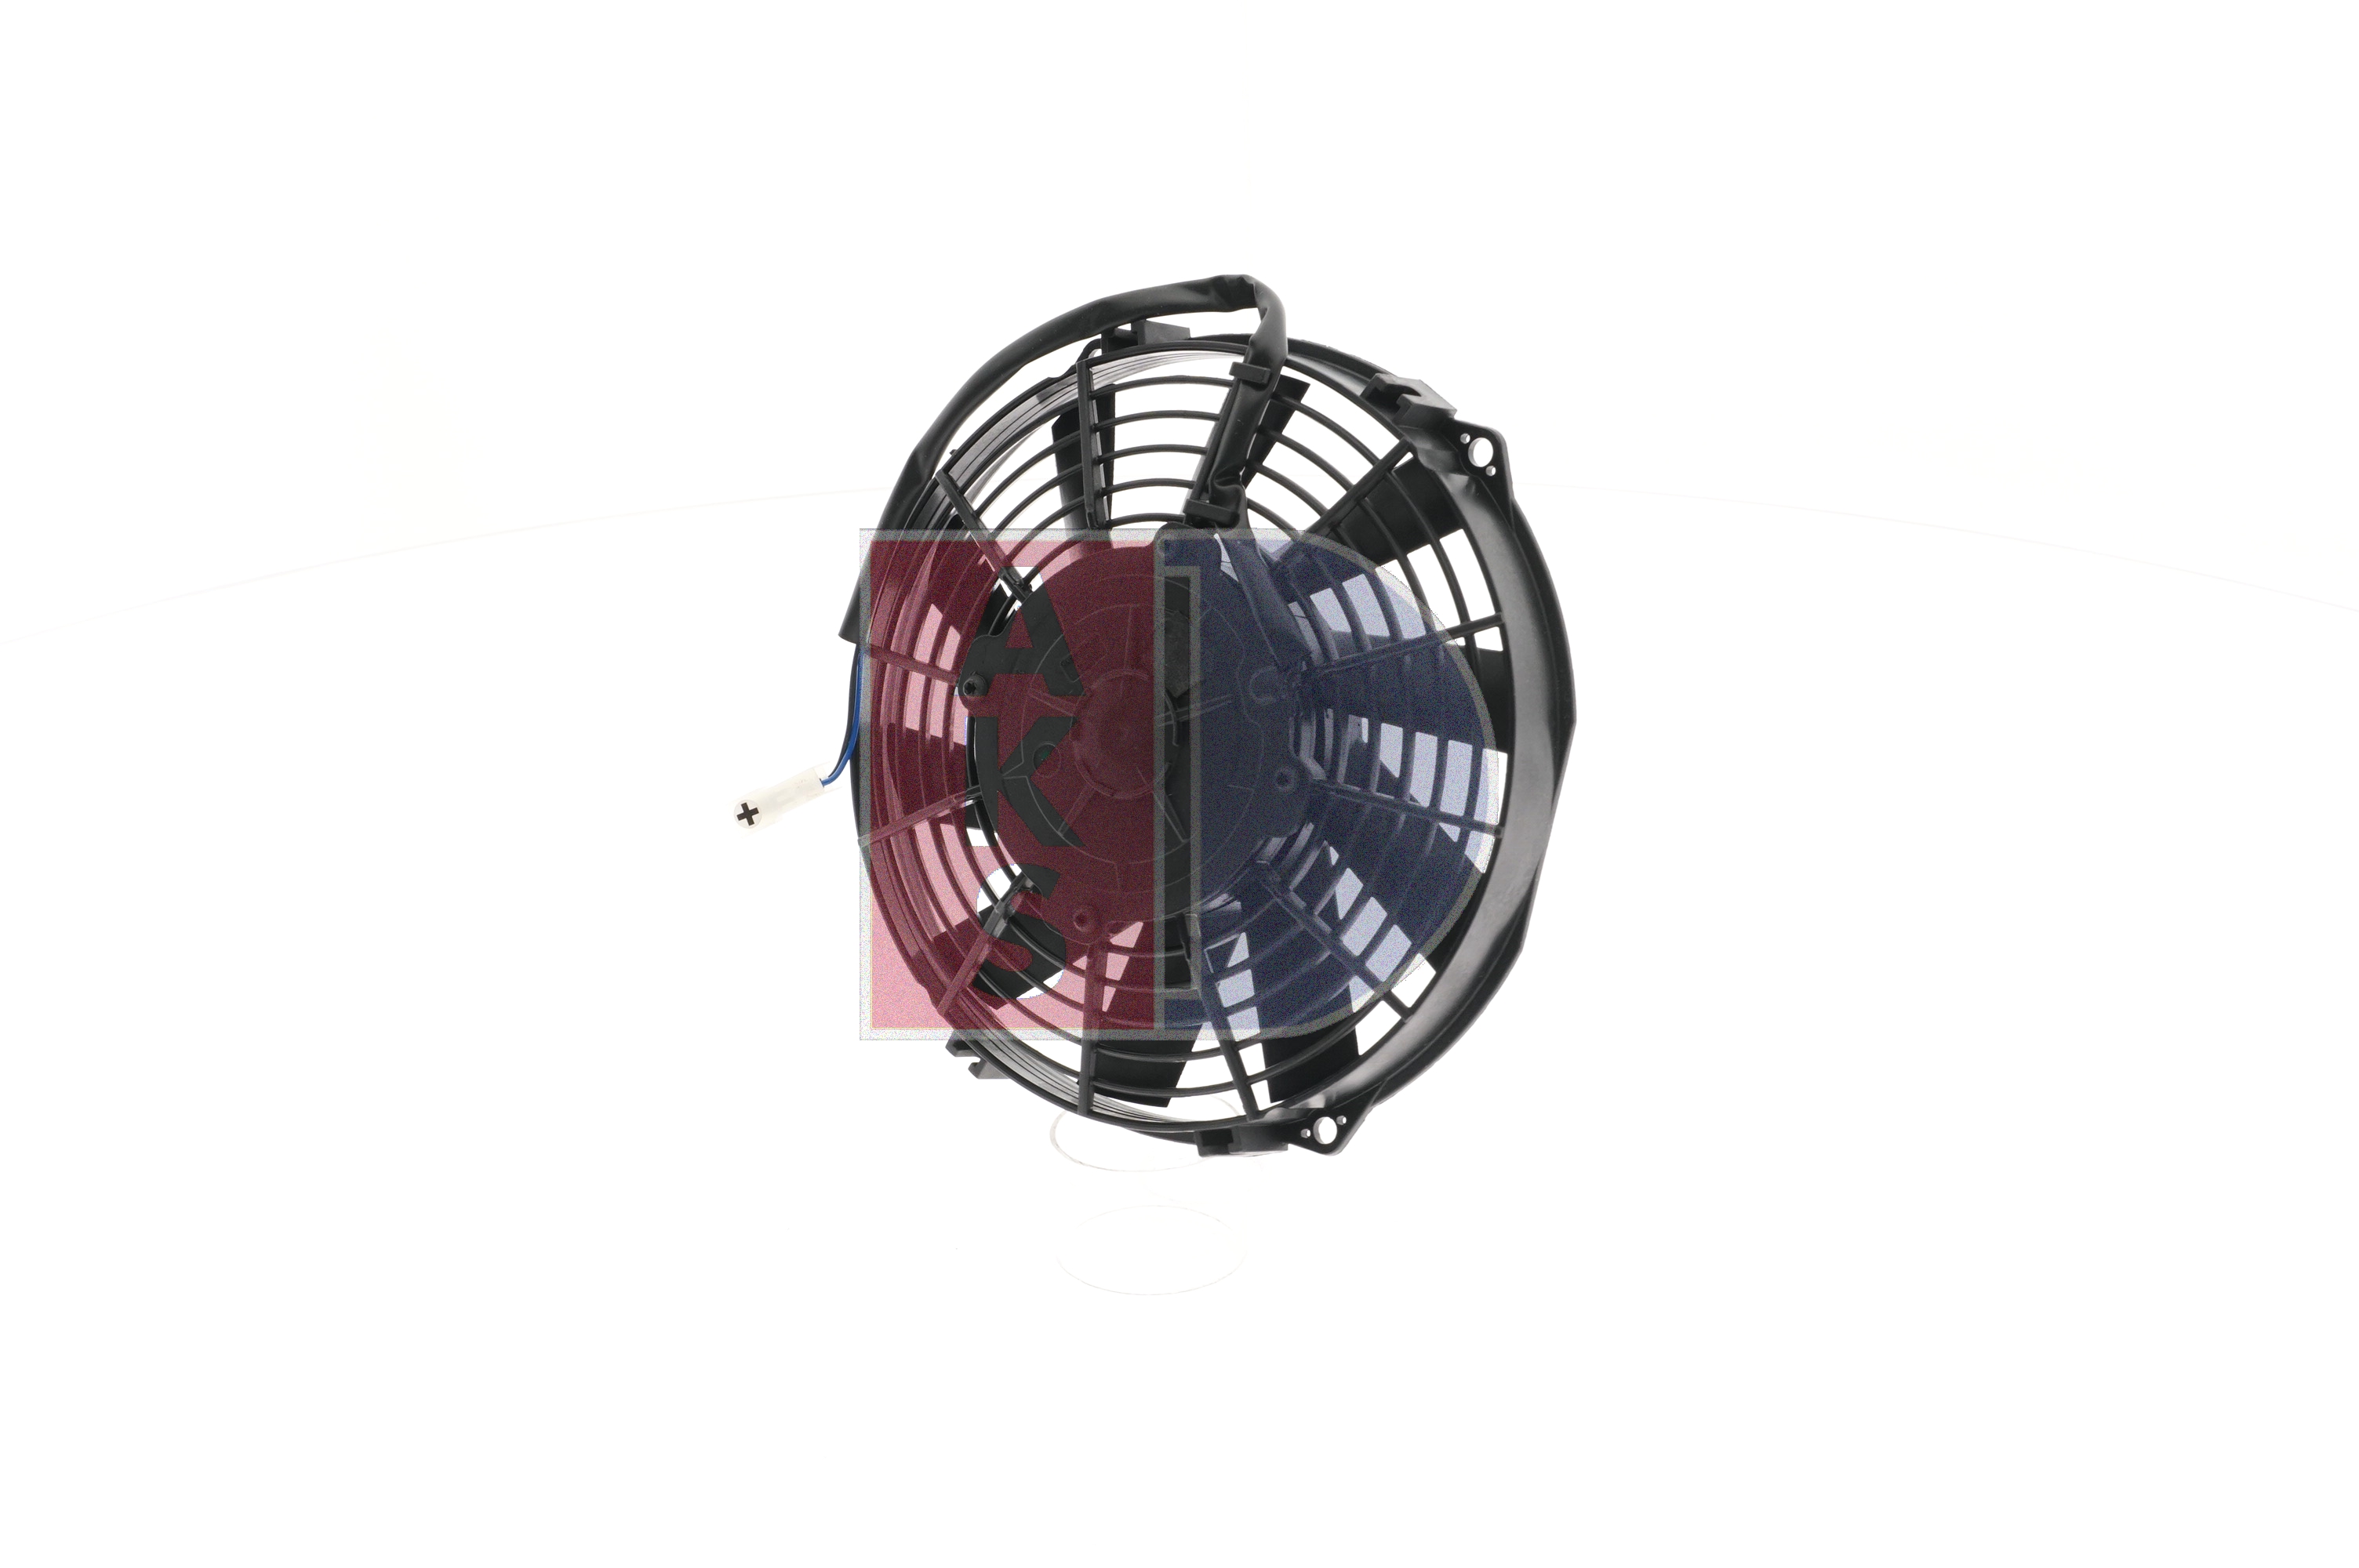 Peugeot Fan, A / C condenser AKS DASIS 870007N at a good price